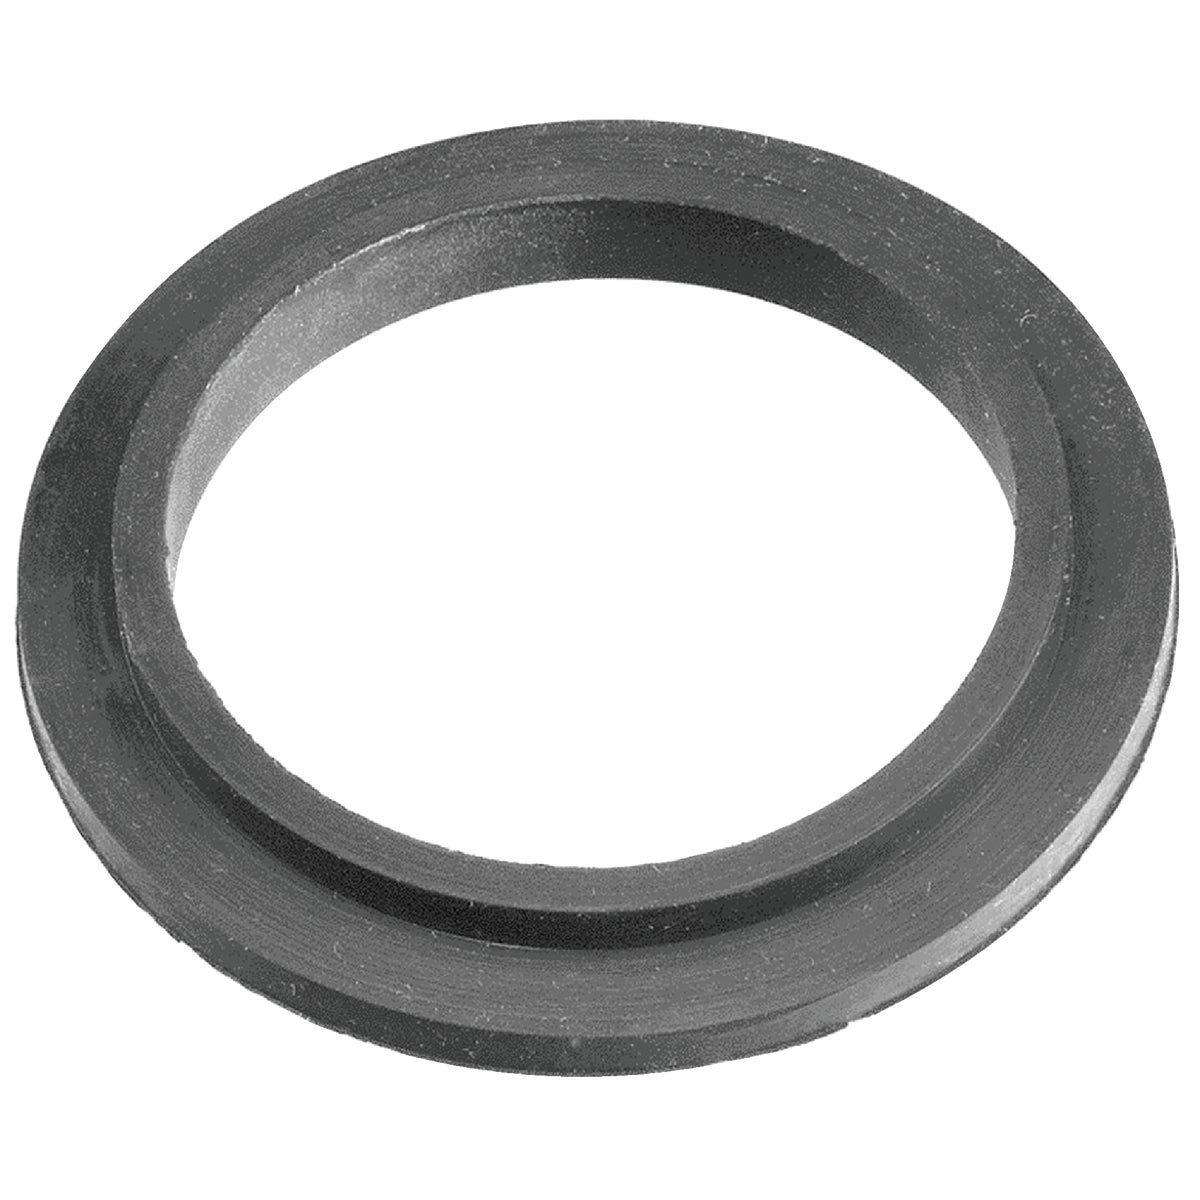 Item 455121, Tank to bowl gasket for Eljer brand toilets.<br>
<br><b>No. DIB836-24:</b> Pkg Qty: 1, Package Type: Card